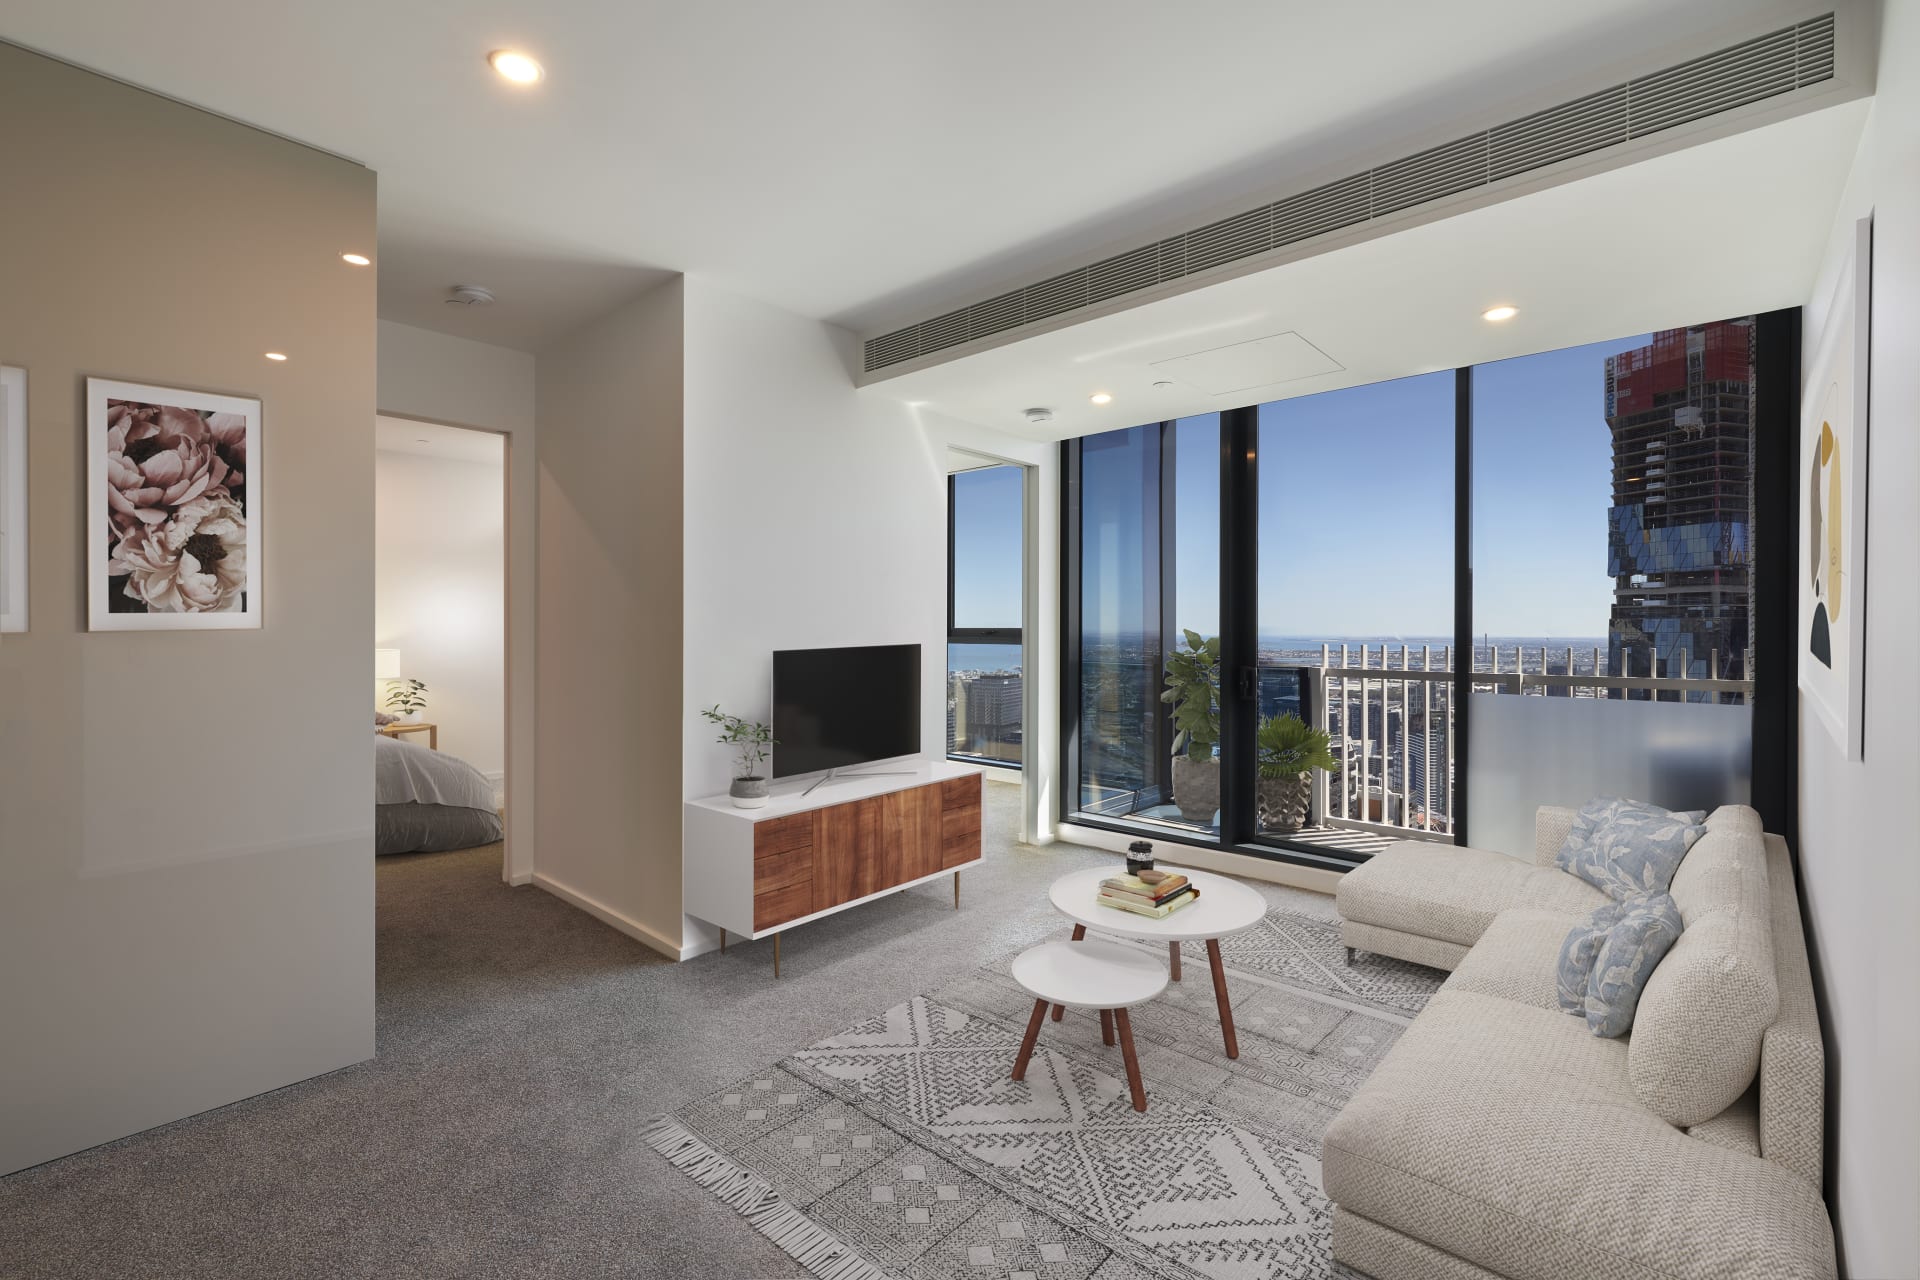 Student apartments for under $500k close to Monash University campuses